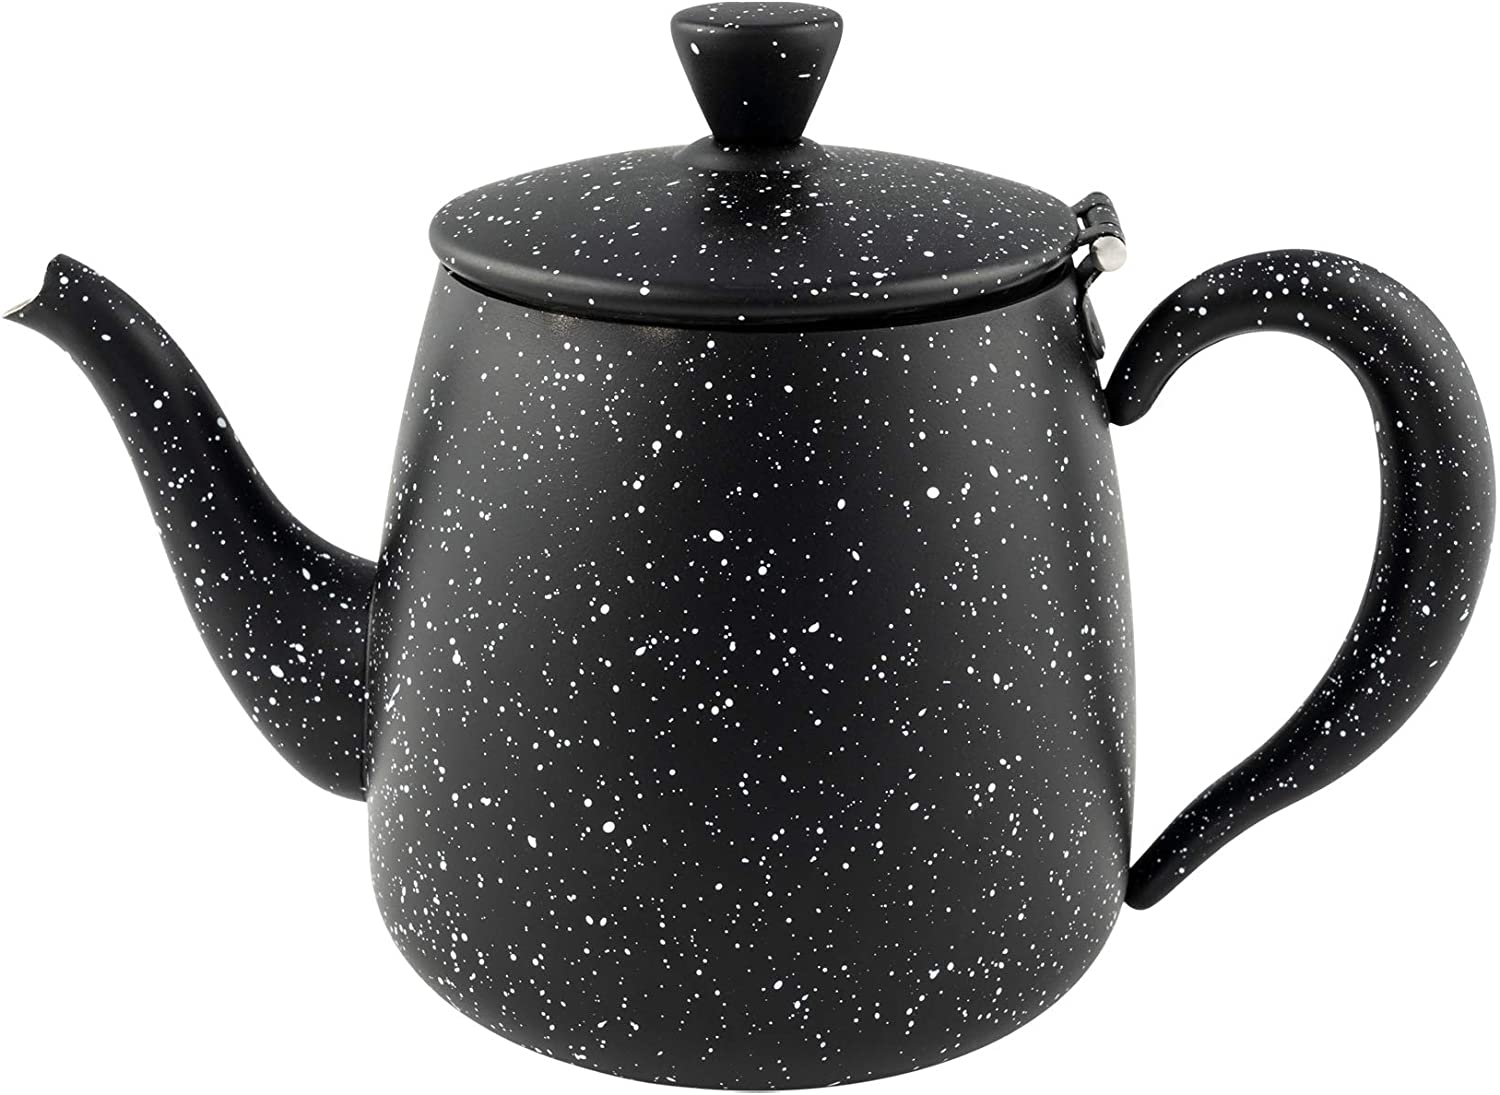 Cafe Ole Café Olé PT-018BG Premium 18oz 0.5L Teapot Made of High Quality Stainless Steel - Black Granite, Drip-Free Spout, Hollow Handles & Hinged Lid